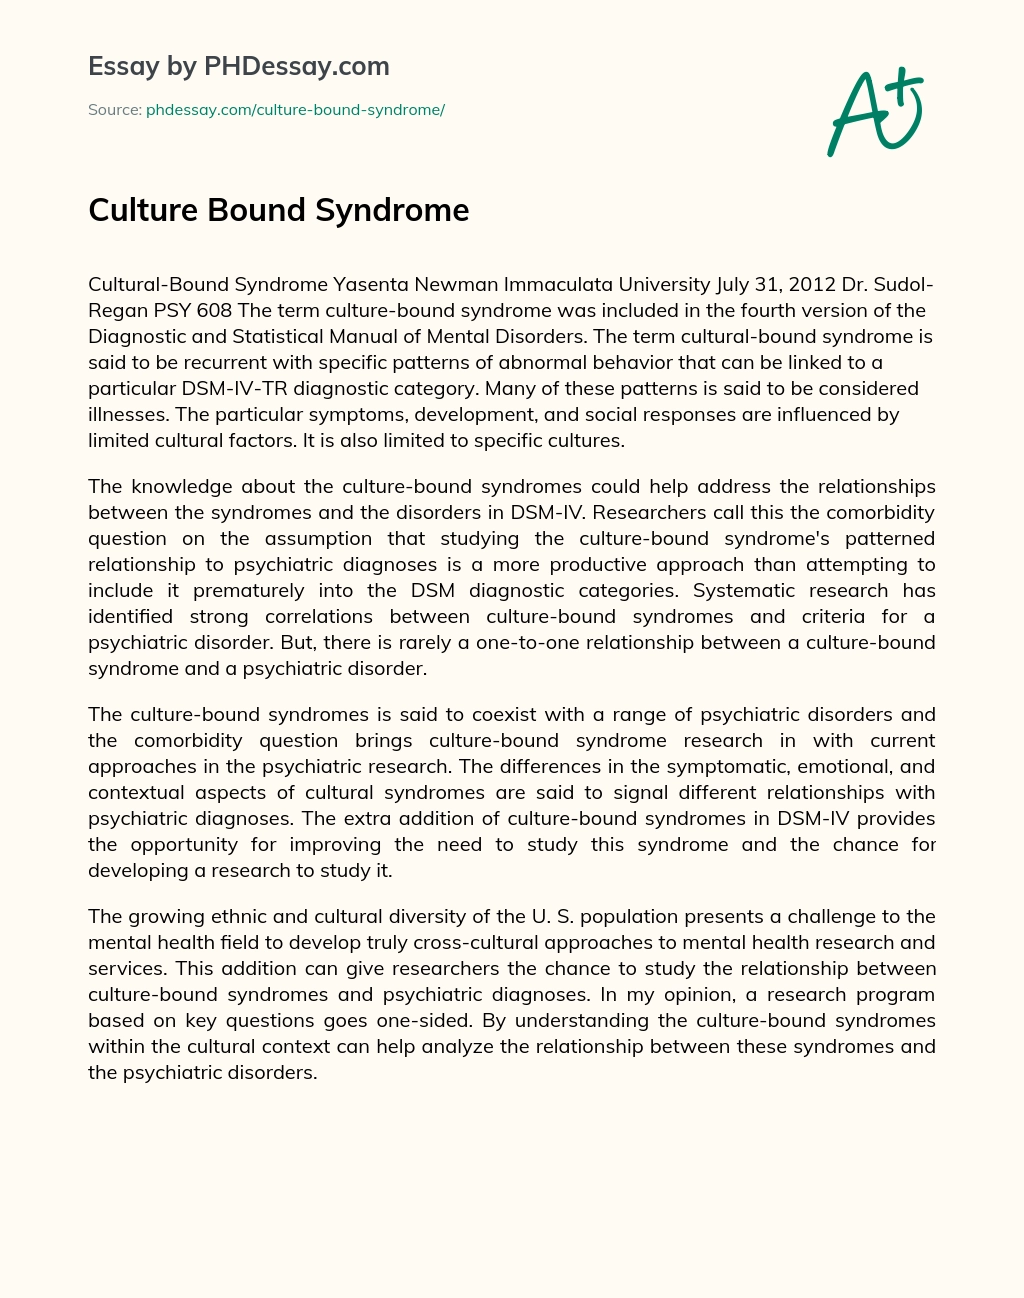 Culture Bound Syndrome essay